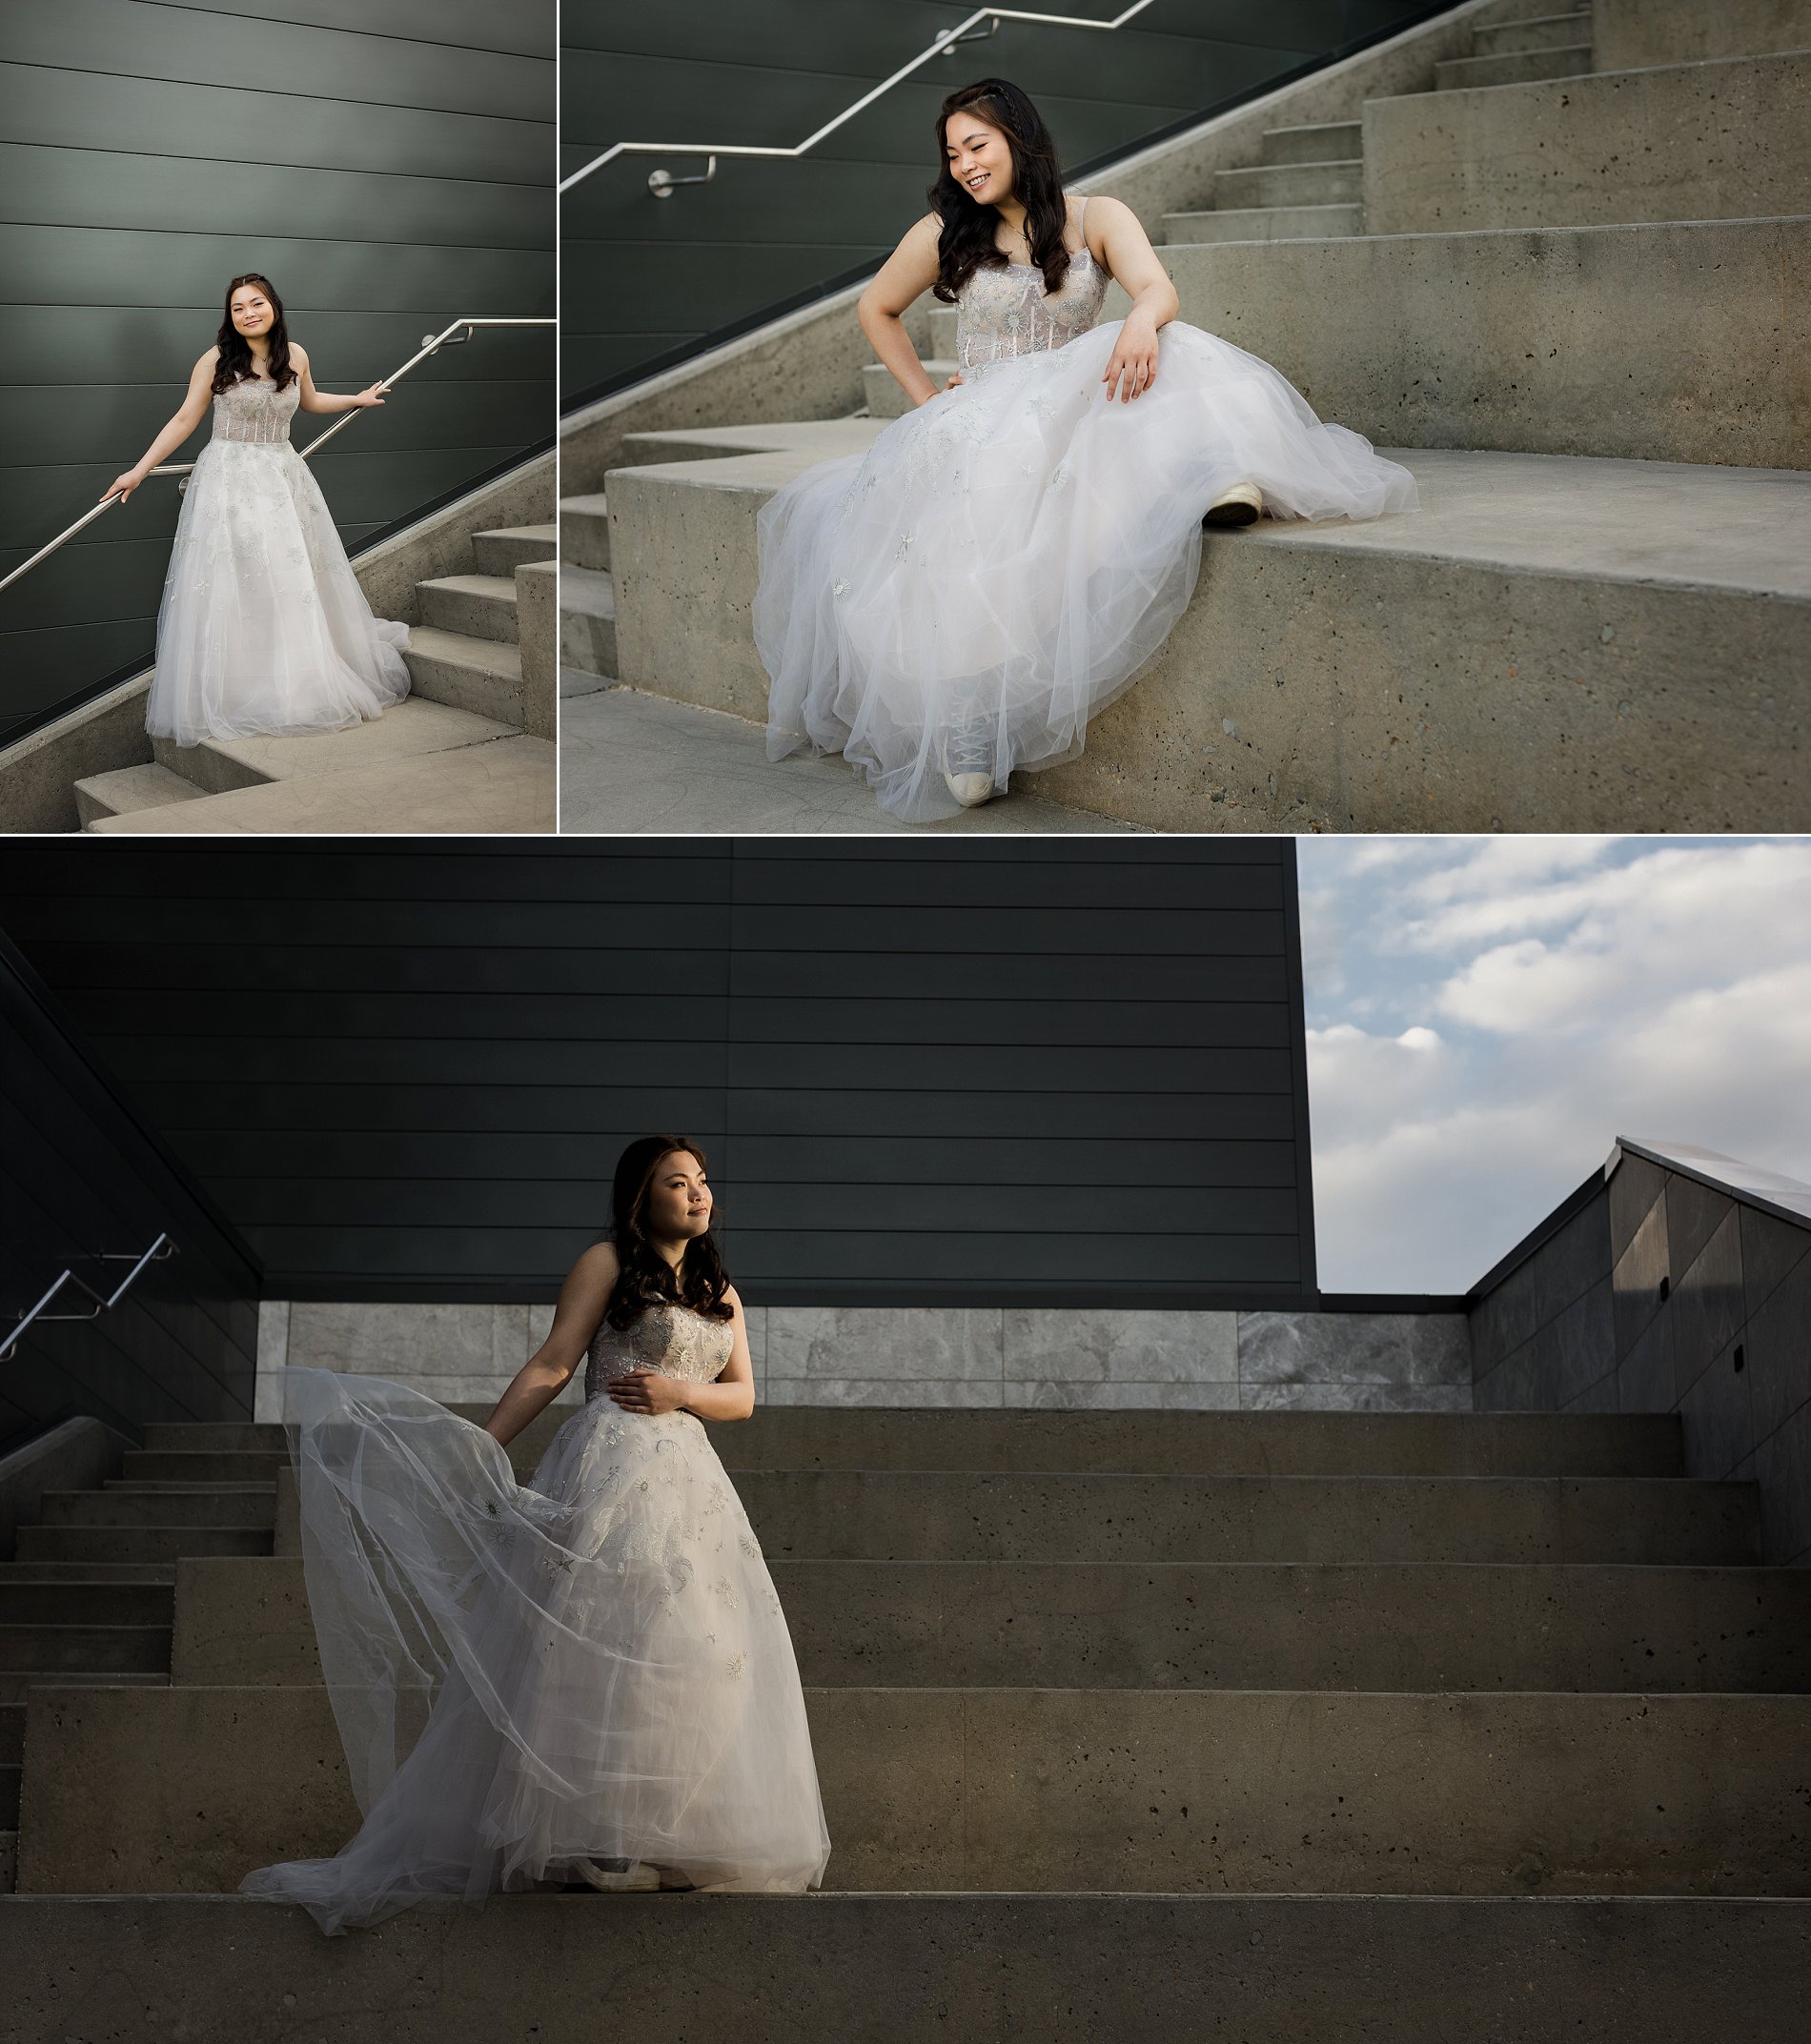 Dramatic graduation photos with a flowing dress at River Landing in downtown Saskatoon.